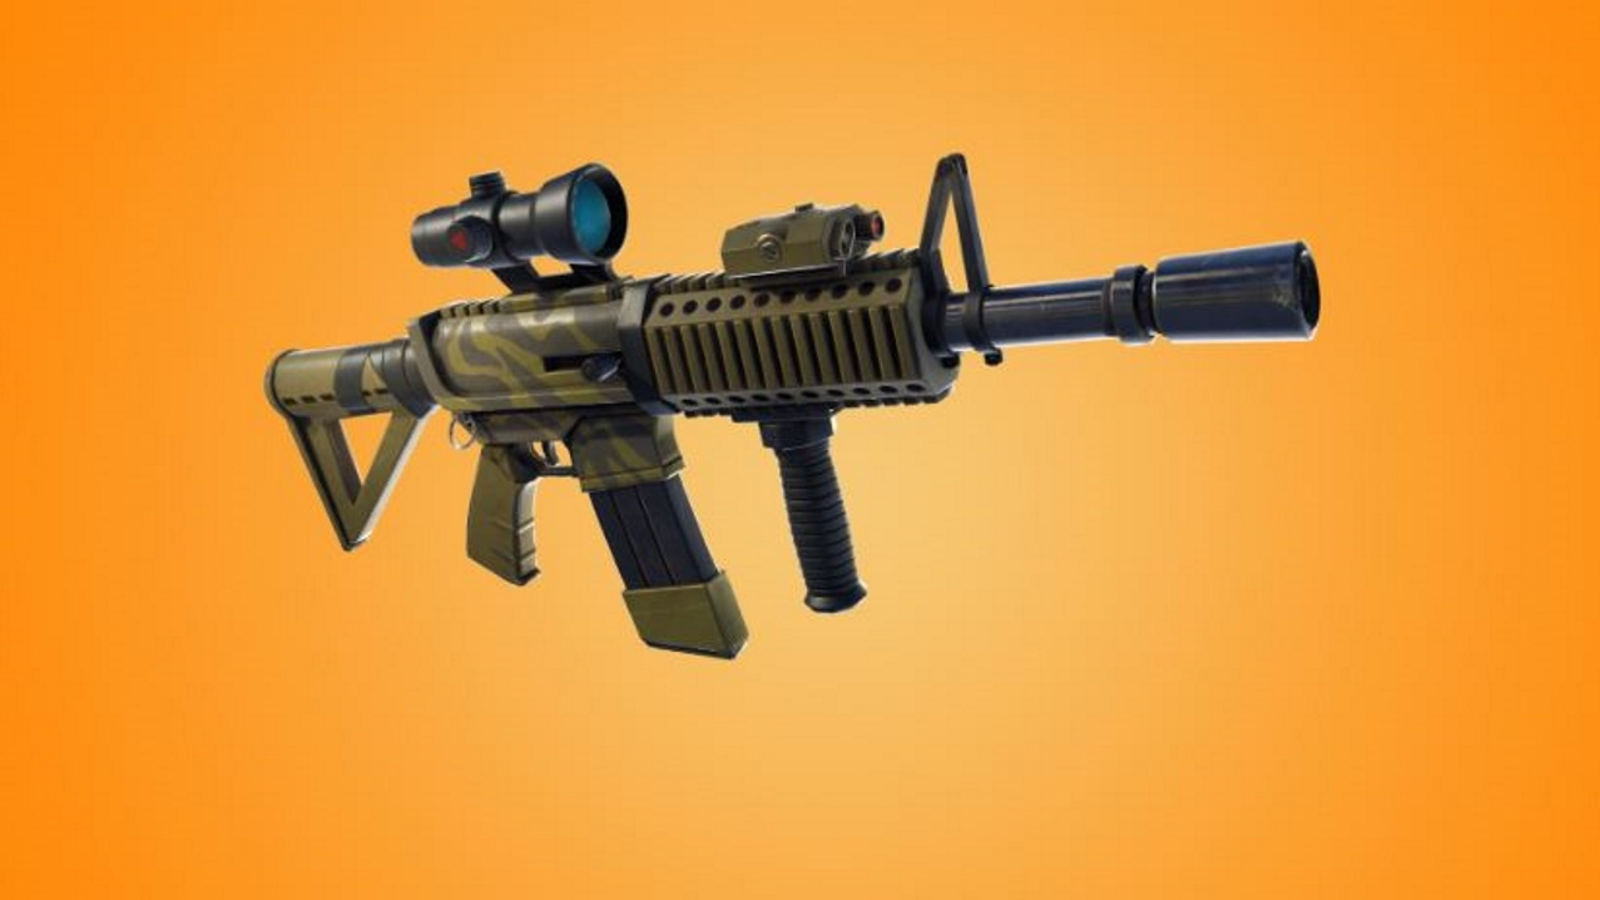 https://assetsio.reedpopcdn.com/fortnite-where-to-find-thermal-weapons-and-locate-huntmaster-saber-2.jpg?width=1600&height=900&fit=crop&quality=100&format=png&enable=upscale&auto=webp